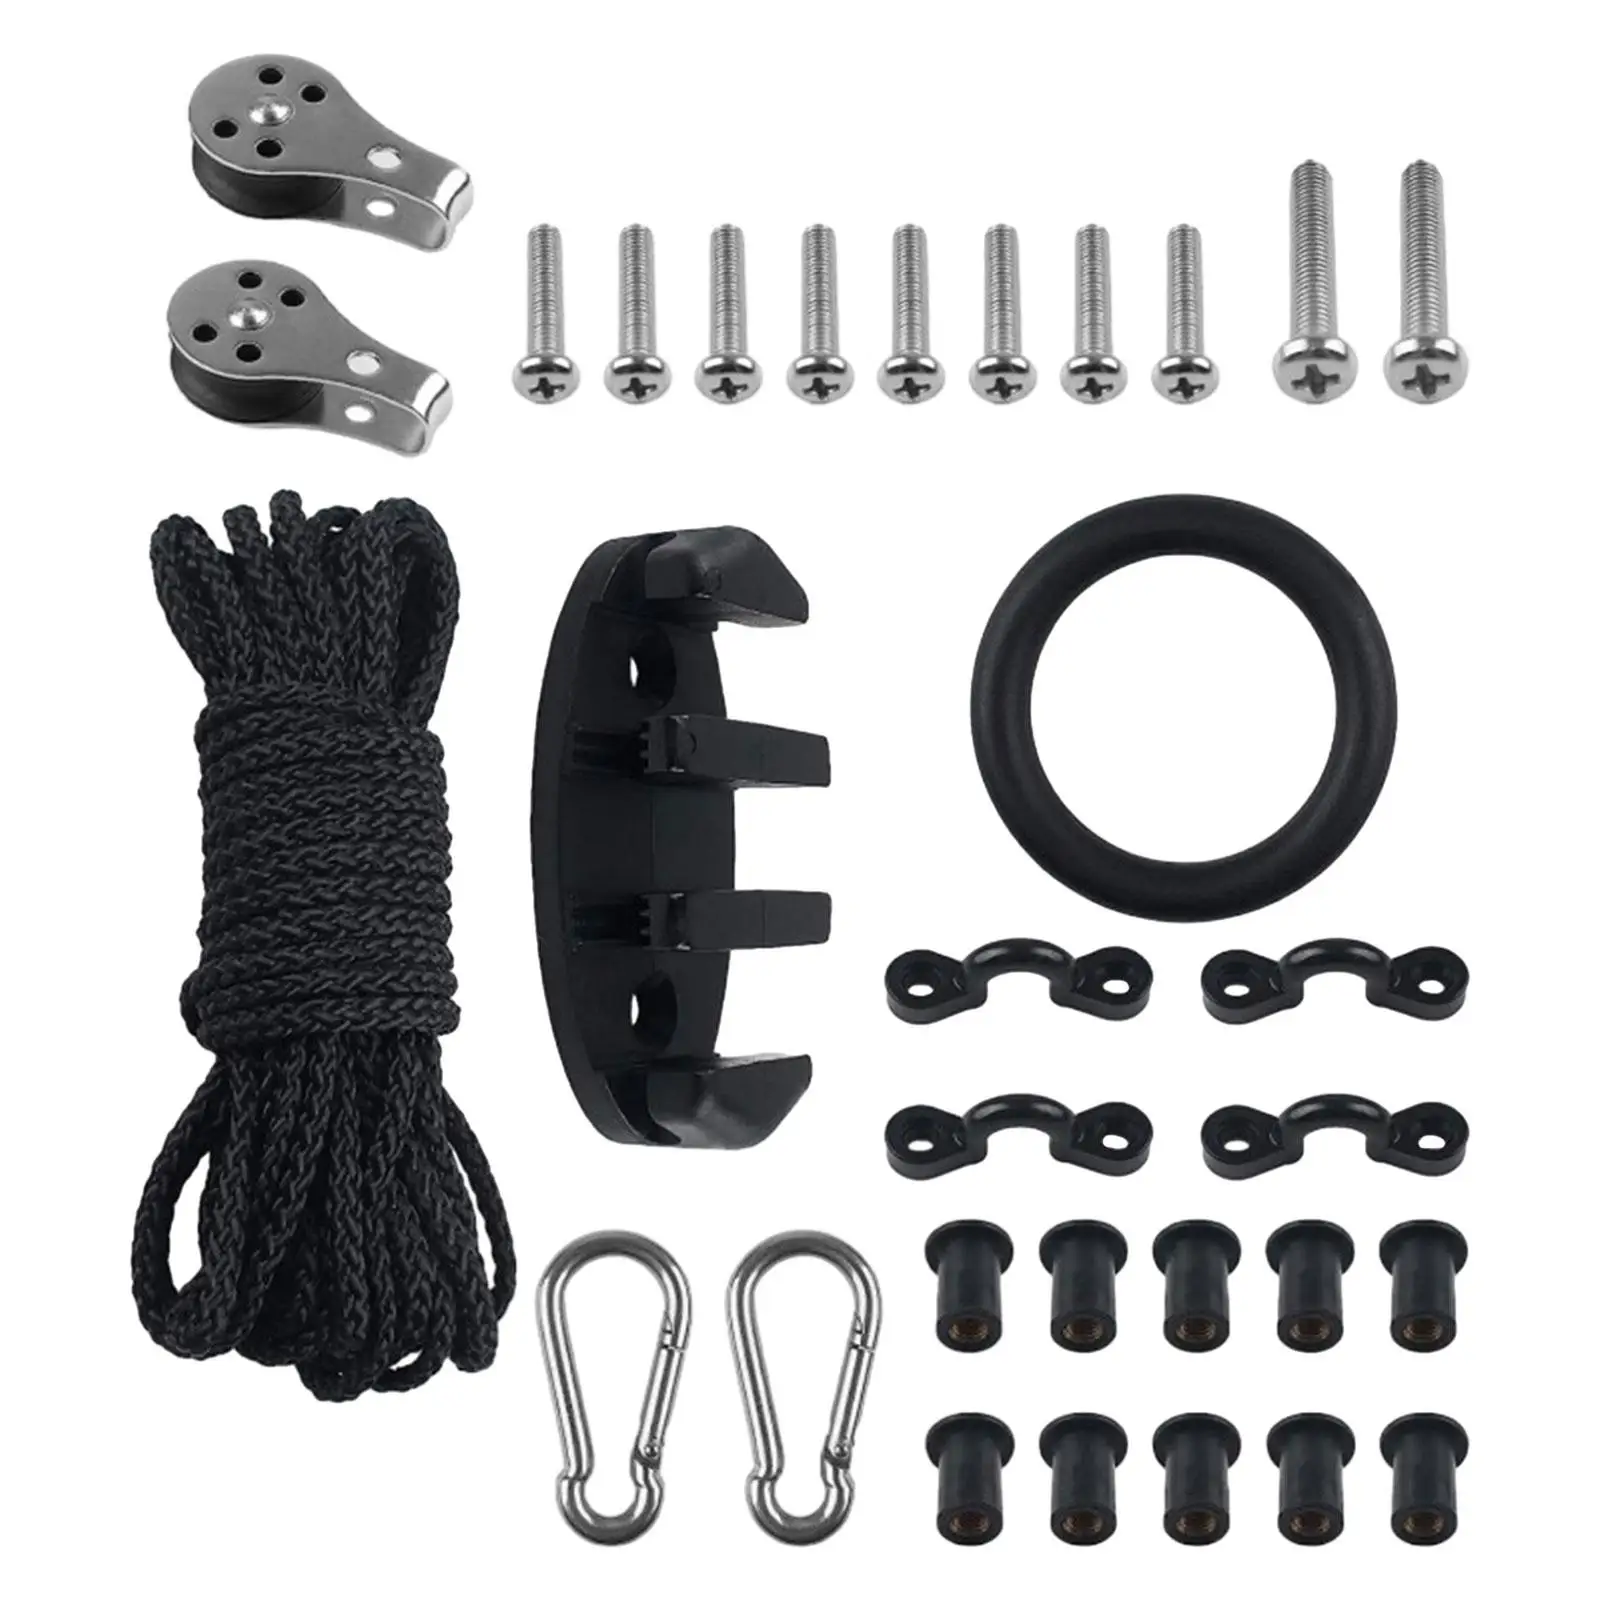 

31Pcs Kayak Canoe Anchor Trolley Kit with Screws Nuts Zig Zag Cleat 9M Rope for Rubber Dinghy Water Sports Fishing Boat Marine